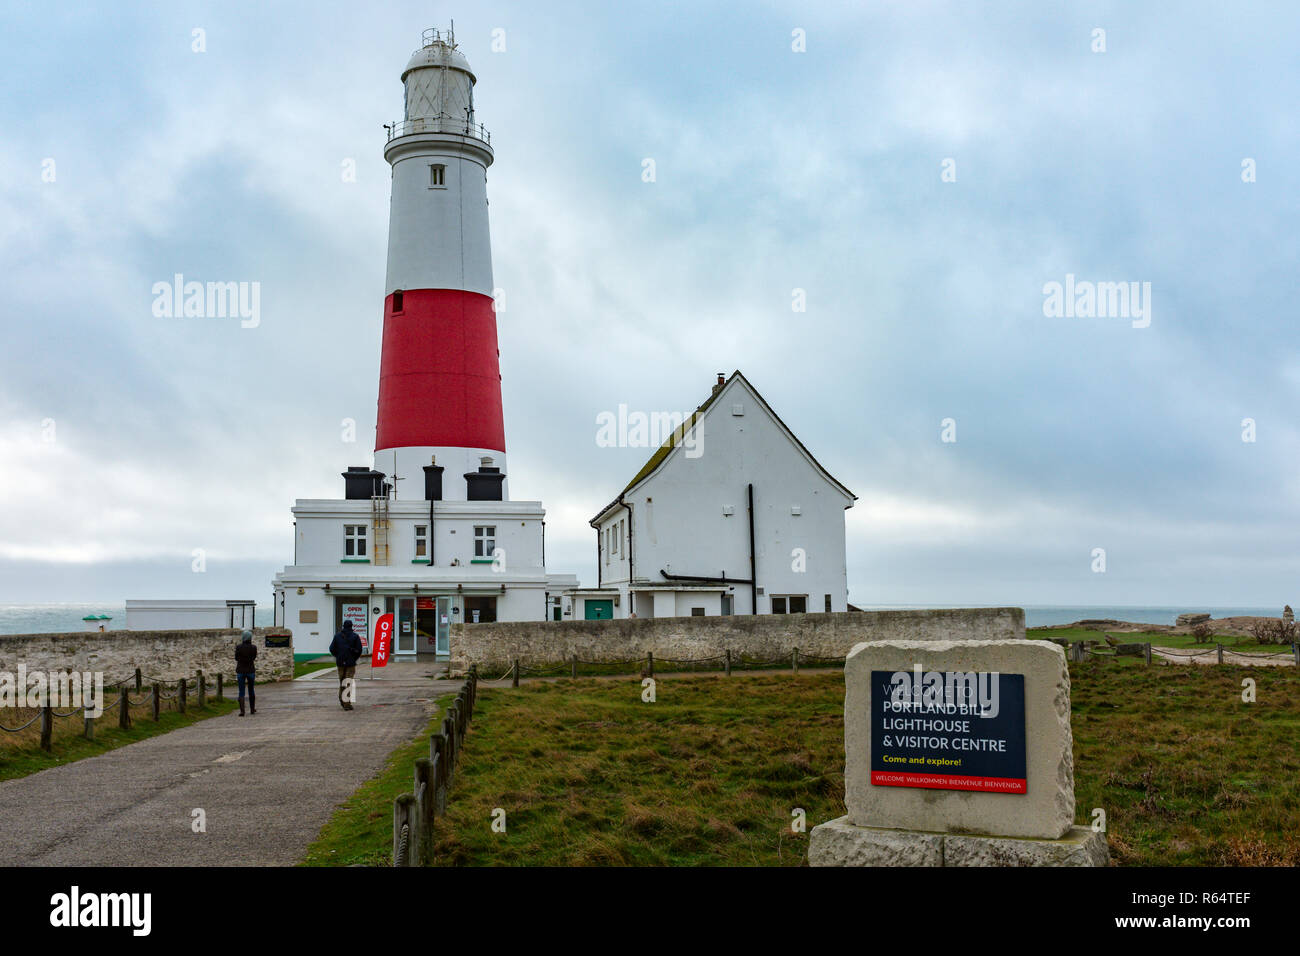 Portland Bill Lighthouse and visitor centre. Stock Photo